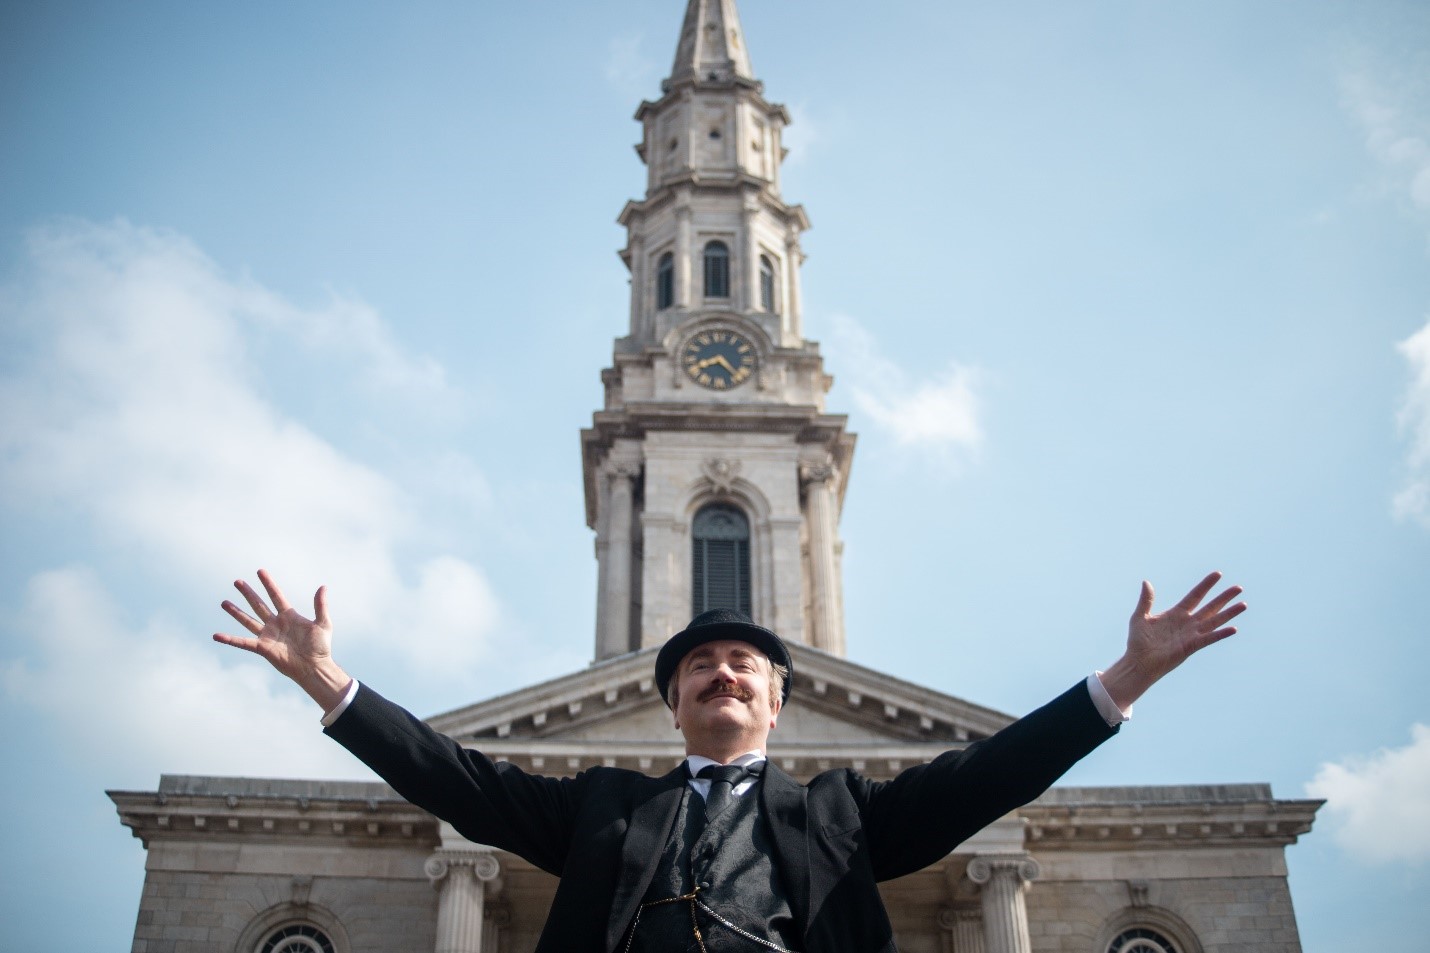 Leopold Bloom at St. George's Church Dublin. An upward shot of a man dressed in black old fashioned style clothes with his arms open wide, smiling, with the front of a church behind him and a blue sky.